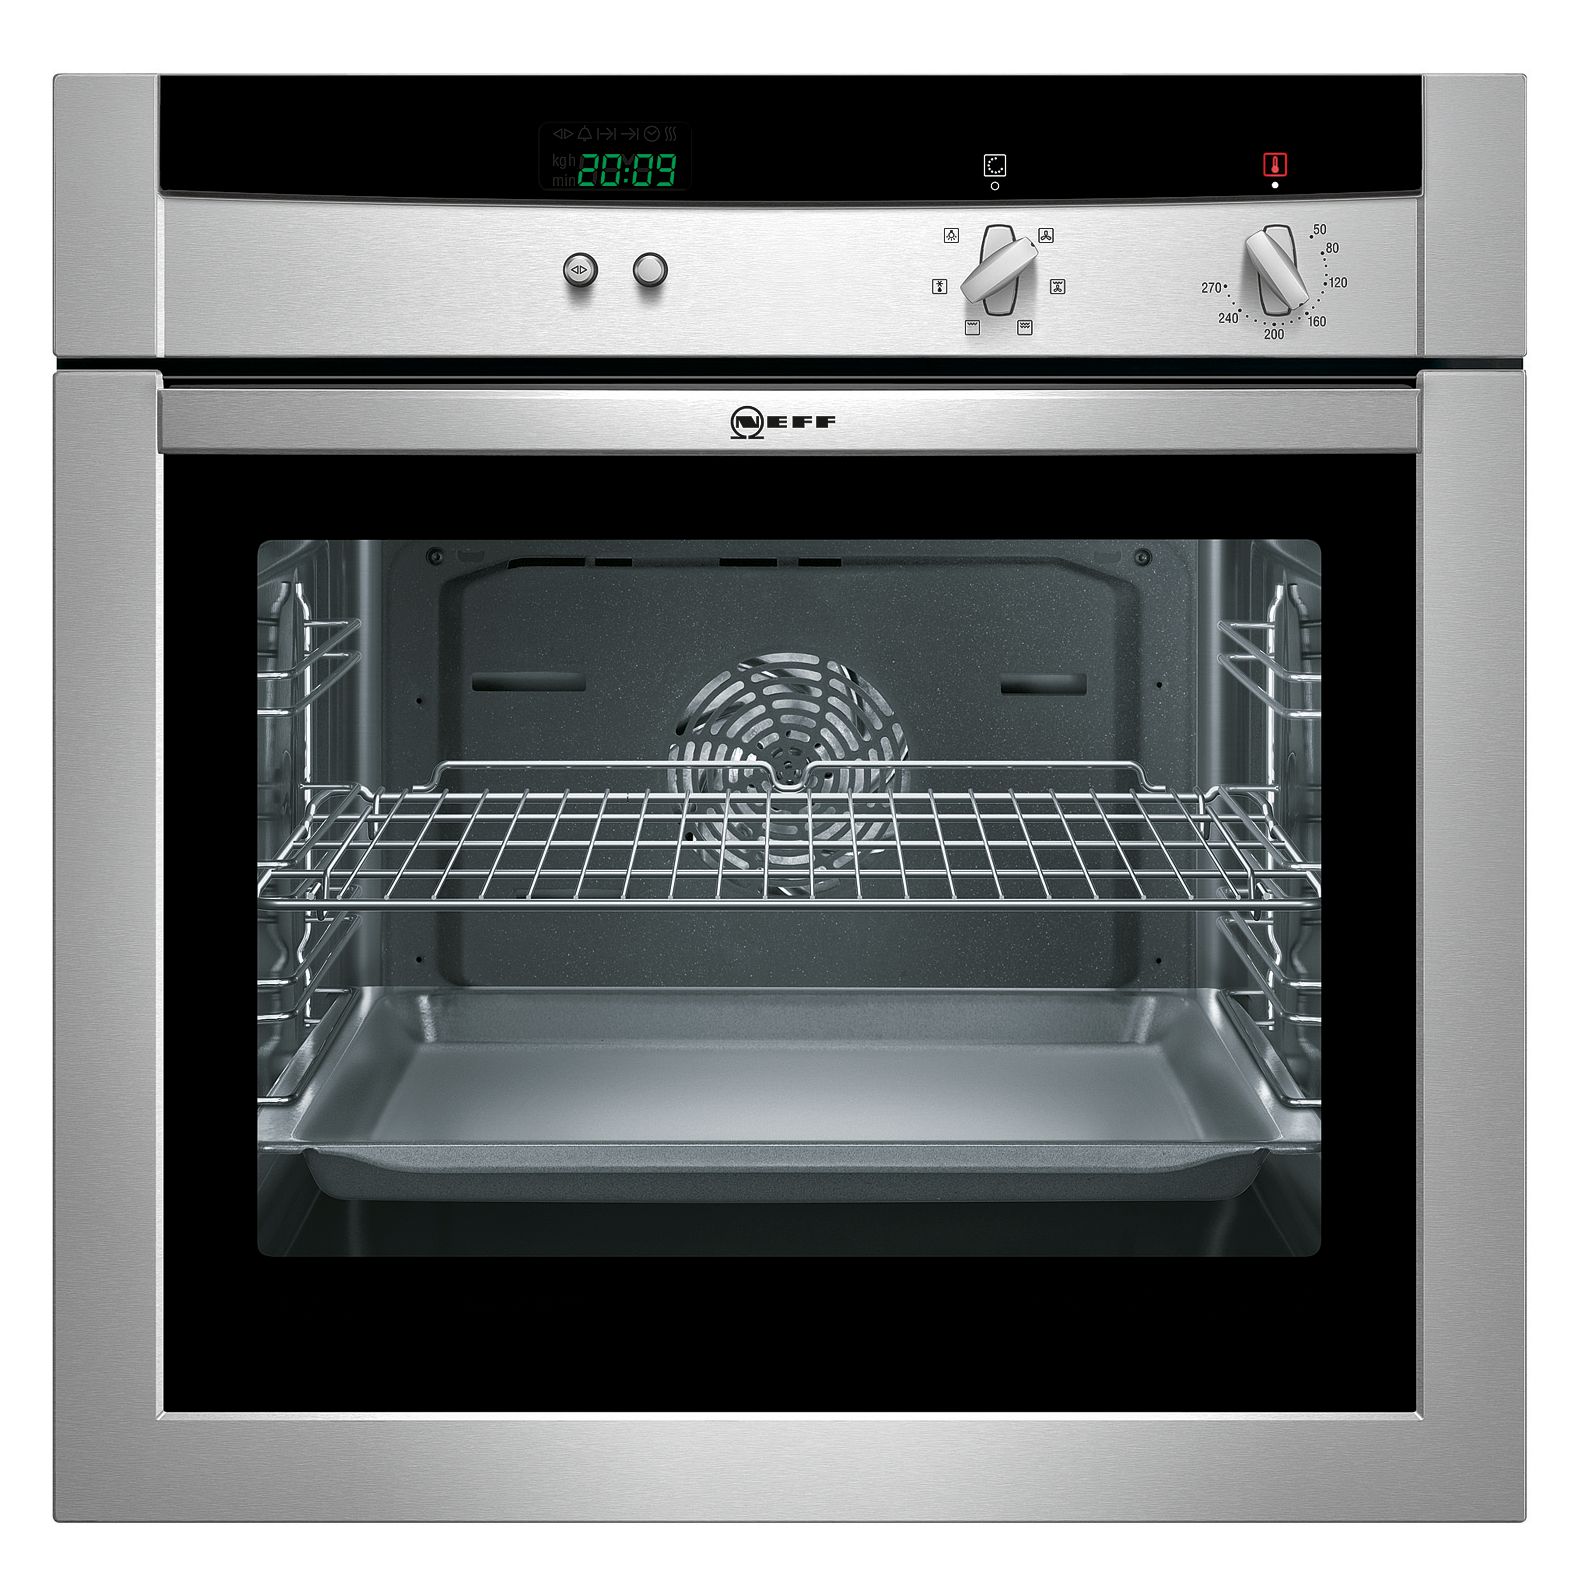 Neff B45M42N0GB Single Electric Oven, Stainless Steel at JohnLewis